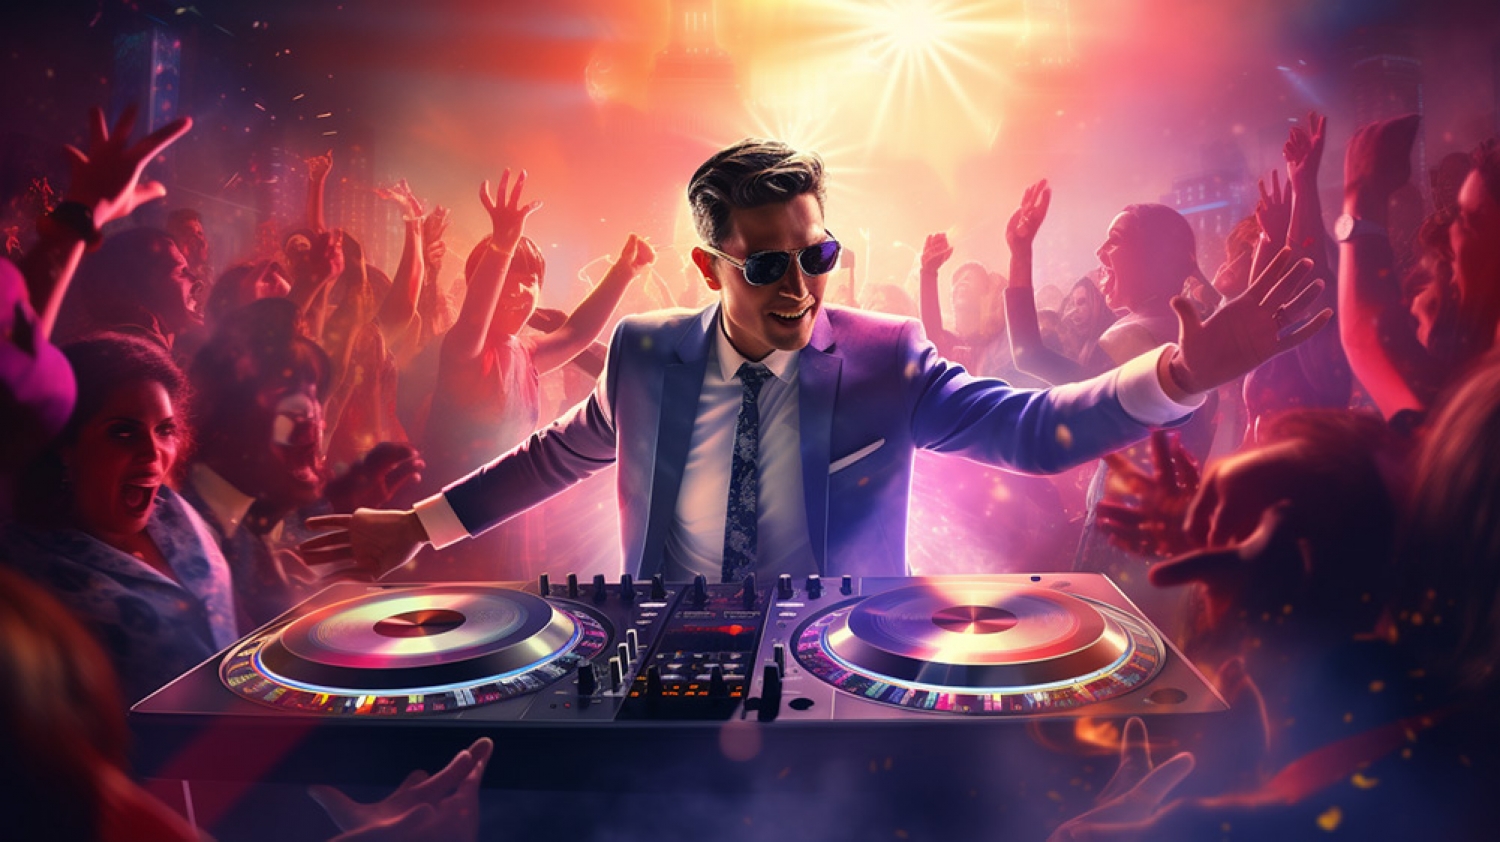 What Makes a Great Wedding DJ